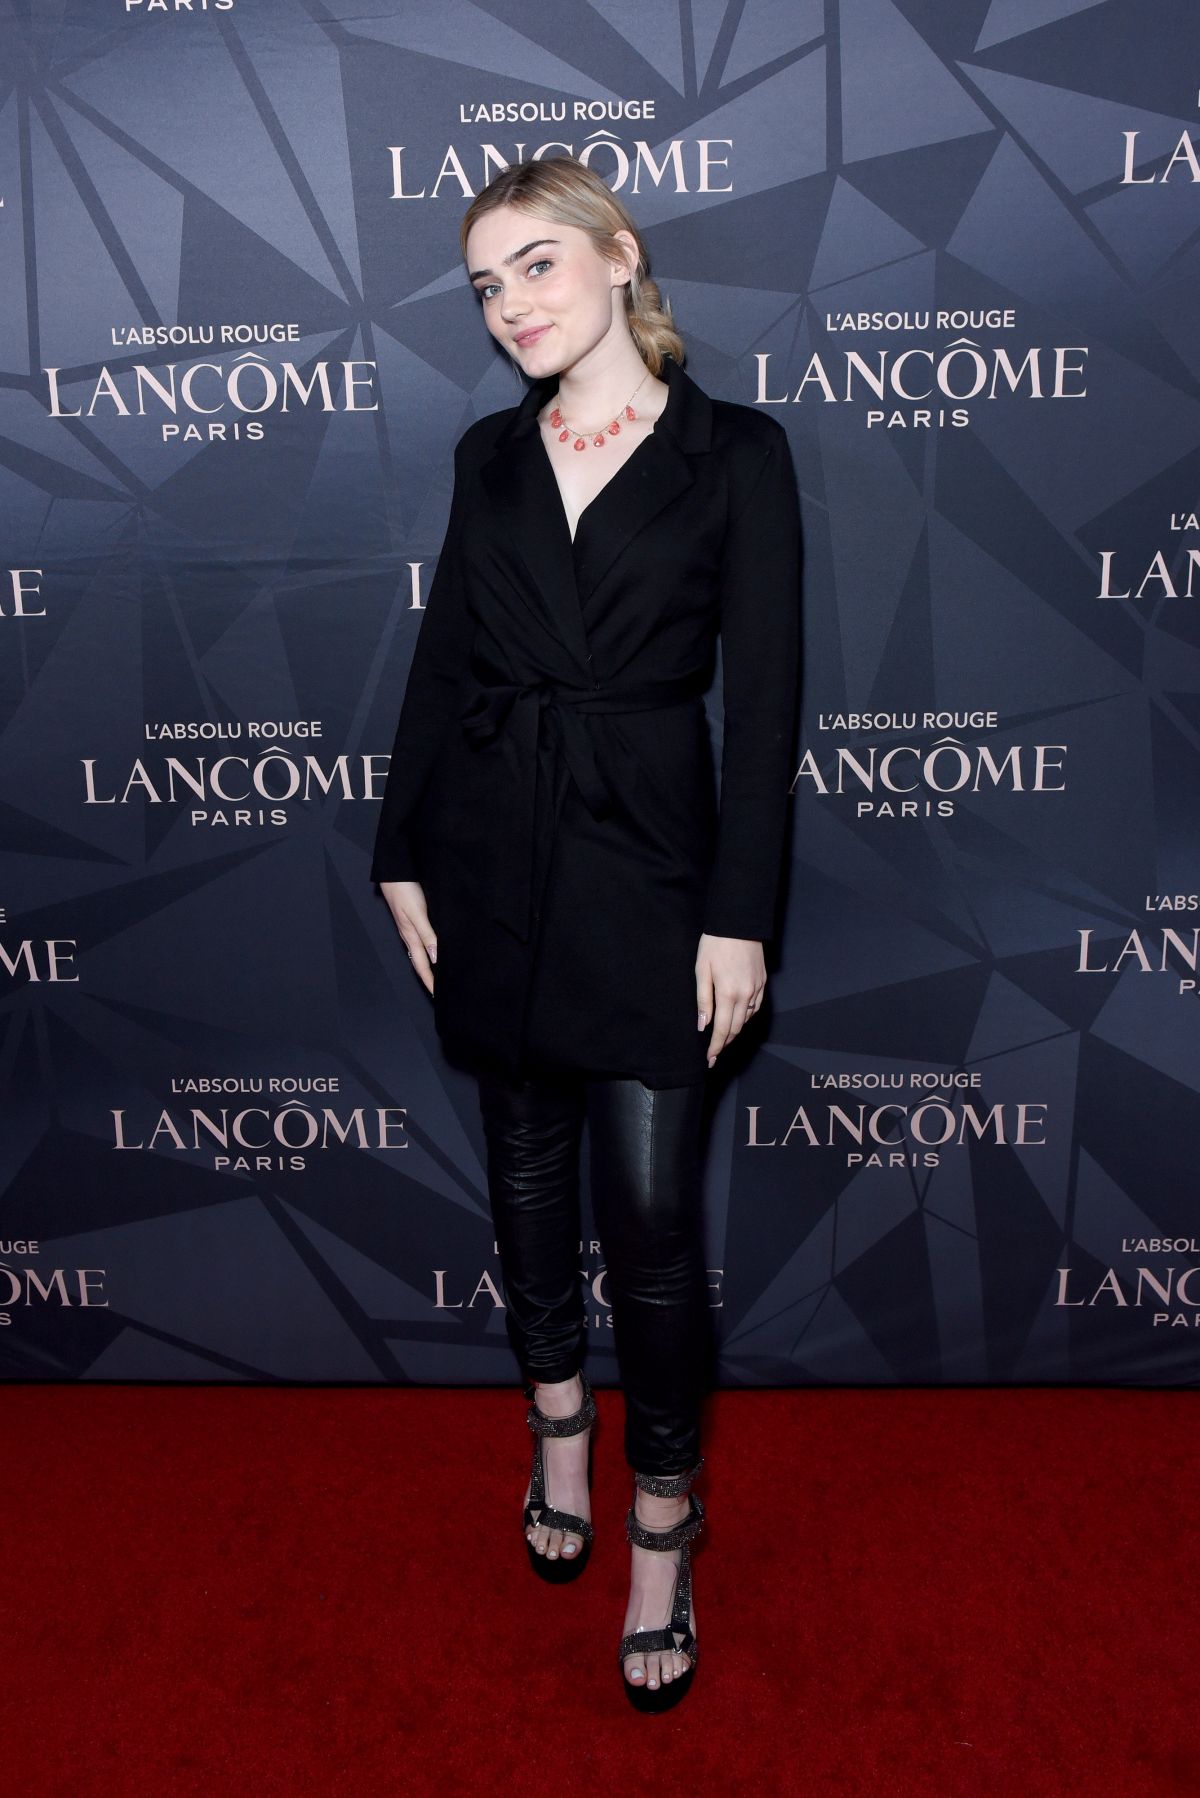 meg-donnelly-lancome-x-vogue-labsolu-ruby-holiday-event-at-raspoutine